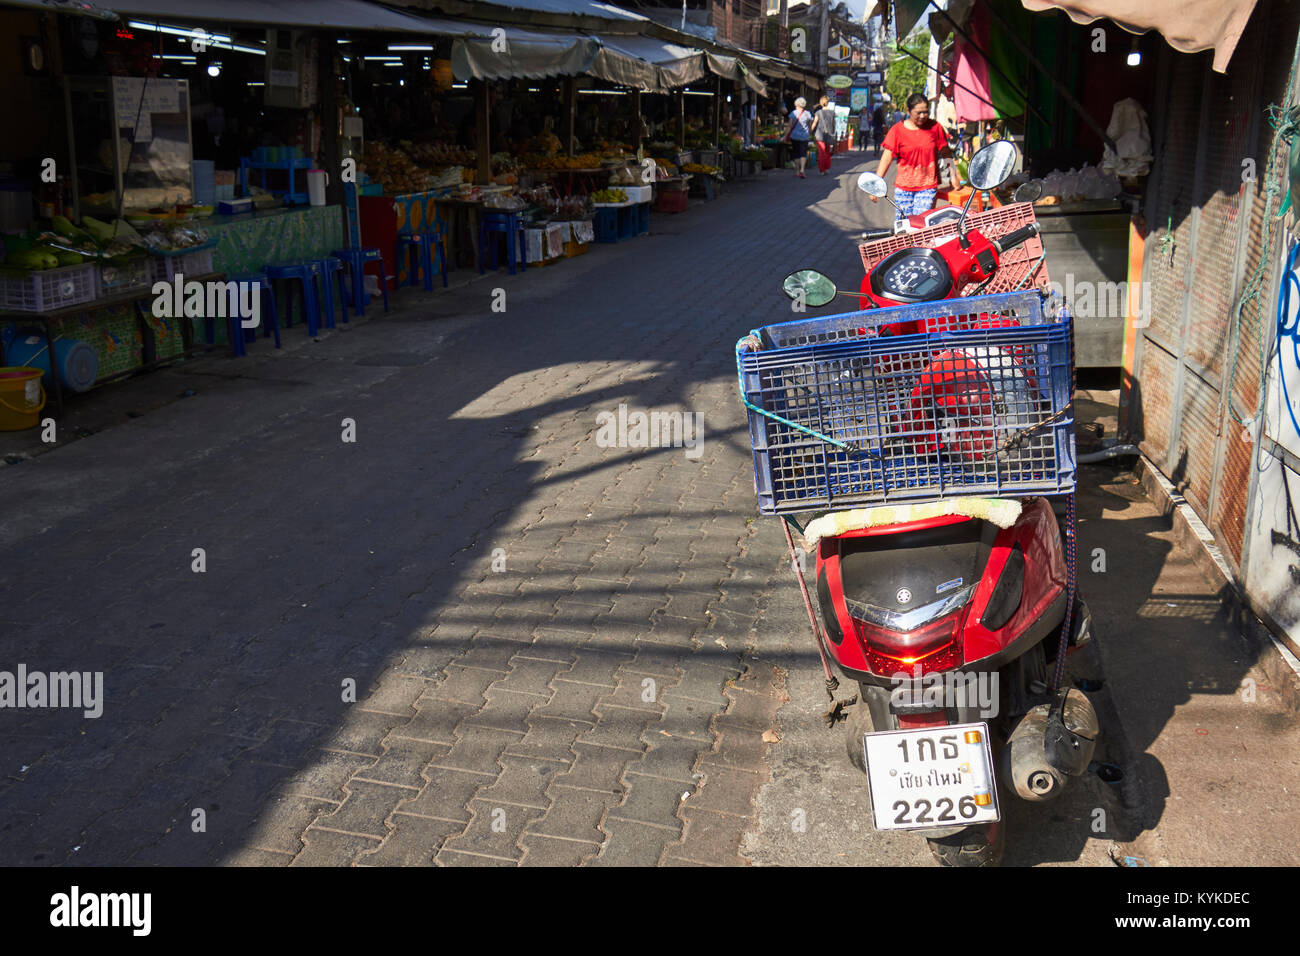 A motorcycle parked on the street, Chinatown, Chiang Mai, Thailand Stock Photo